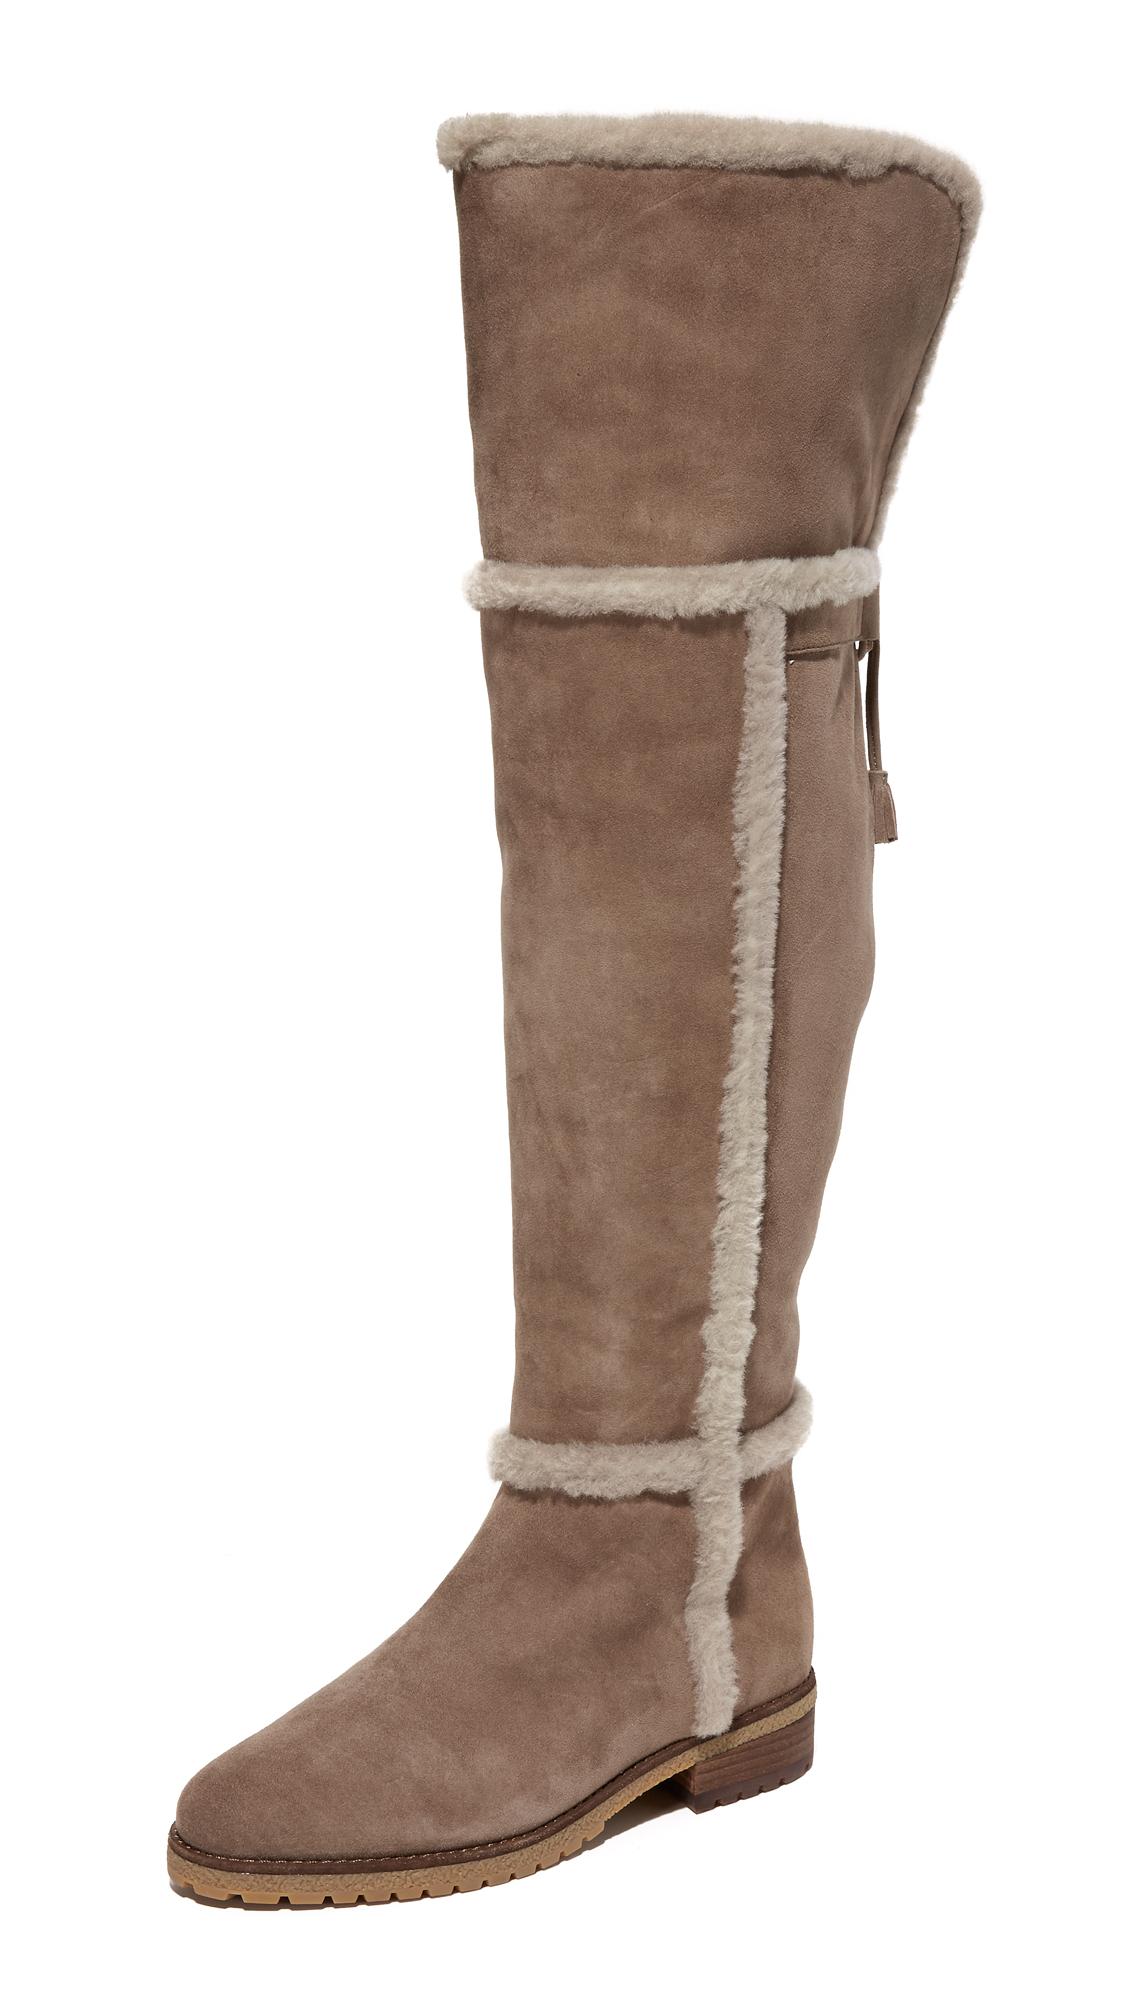 Frye Suede Tamara Shearling Over The Knee Boots in Taupe (Brown) - Lyst